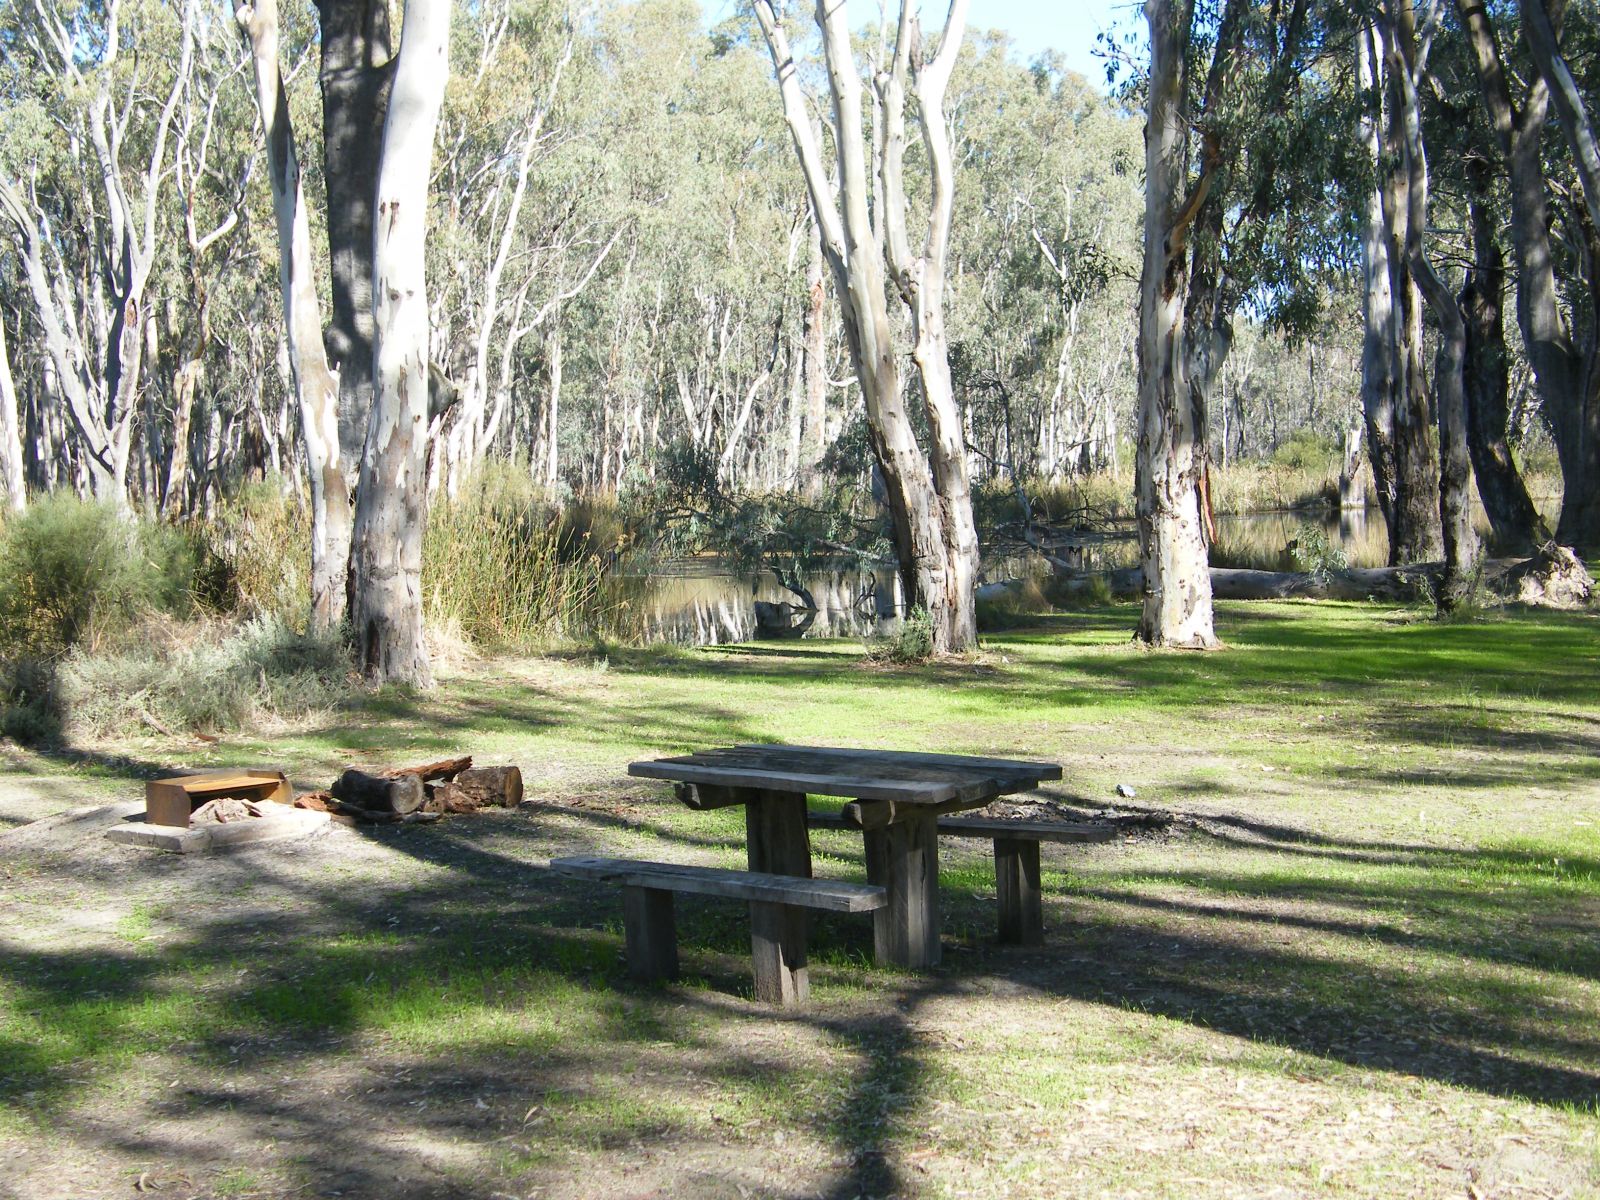 A flat grassy area with a picnic table and wood-fired BBQ next to a creek